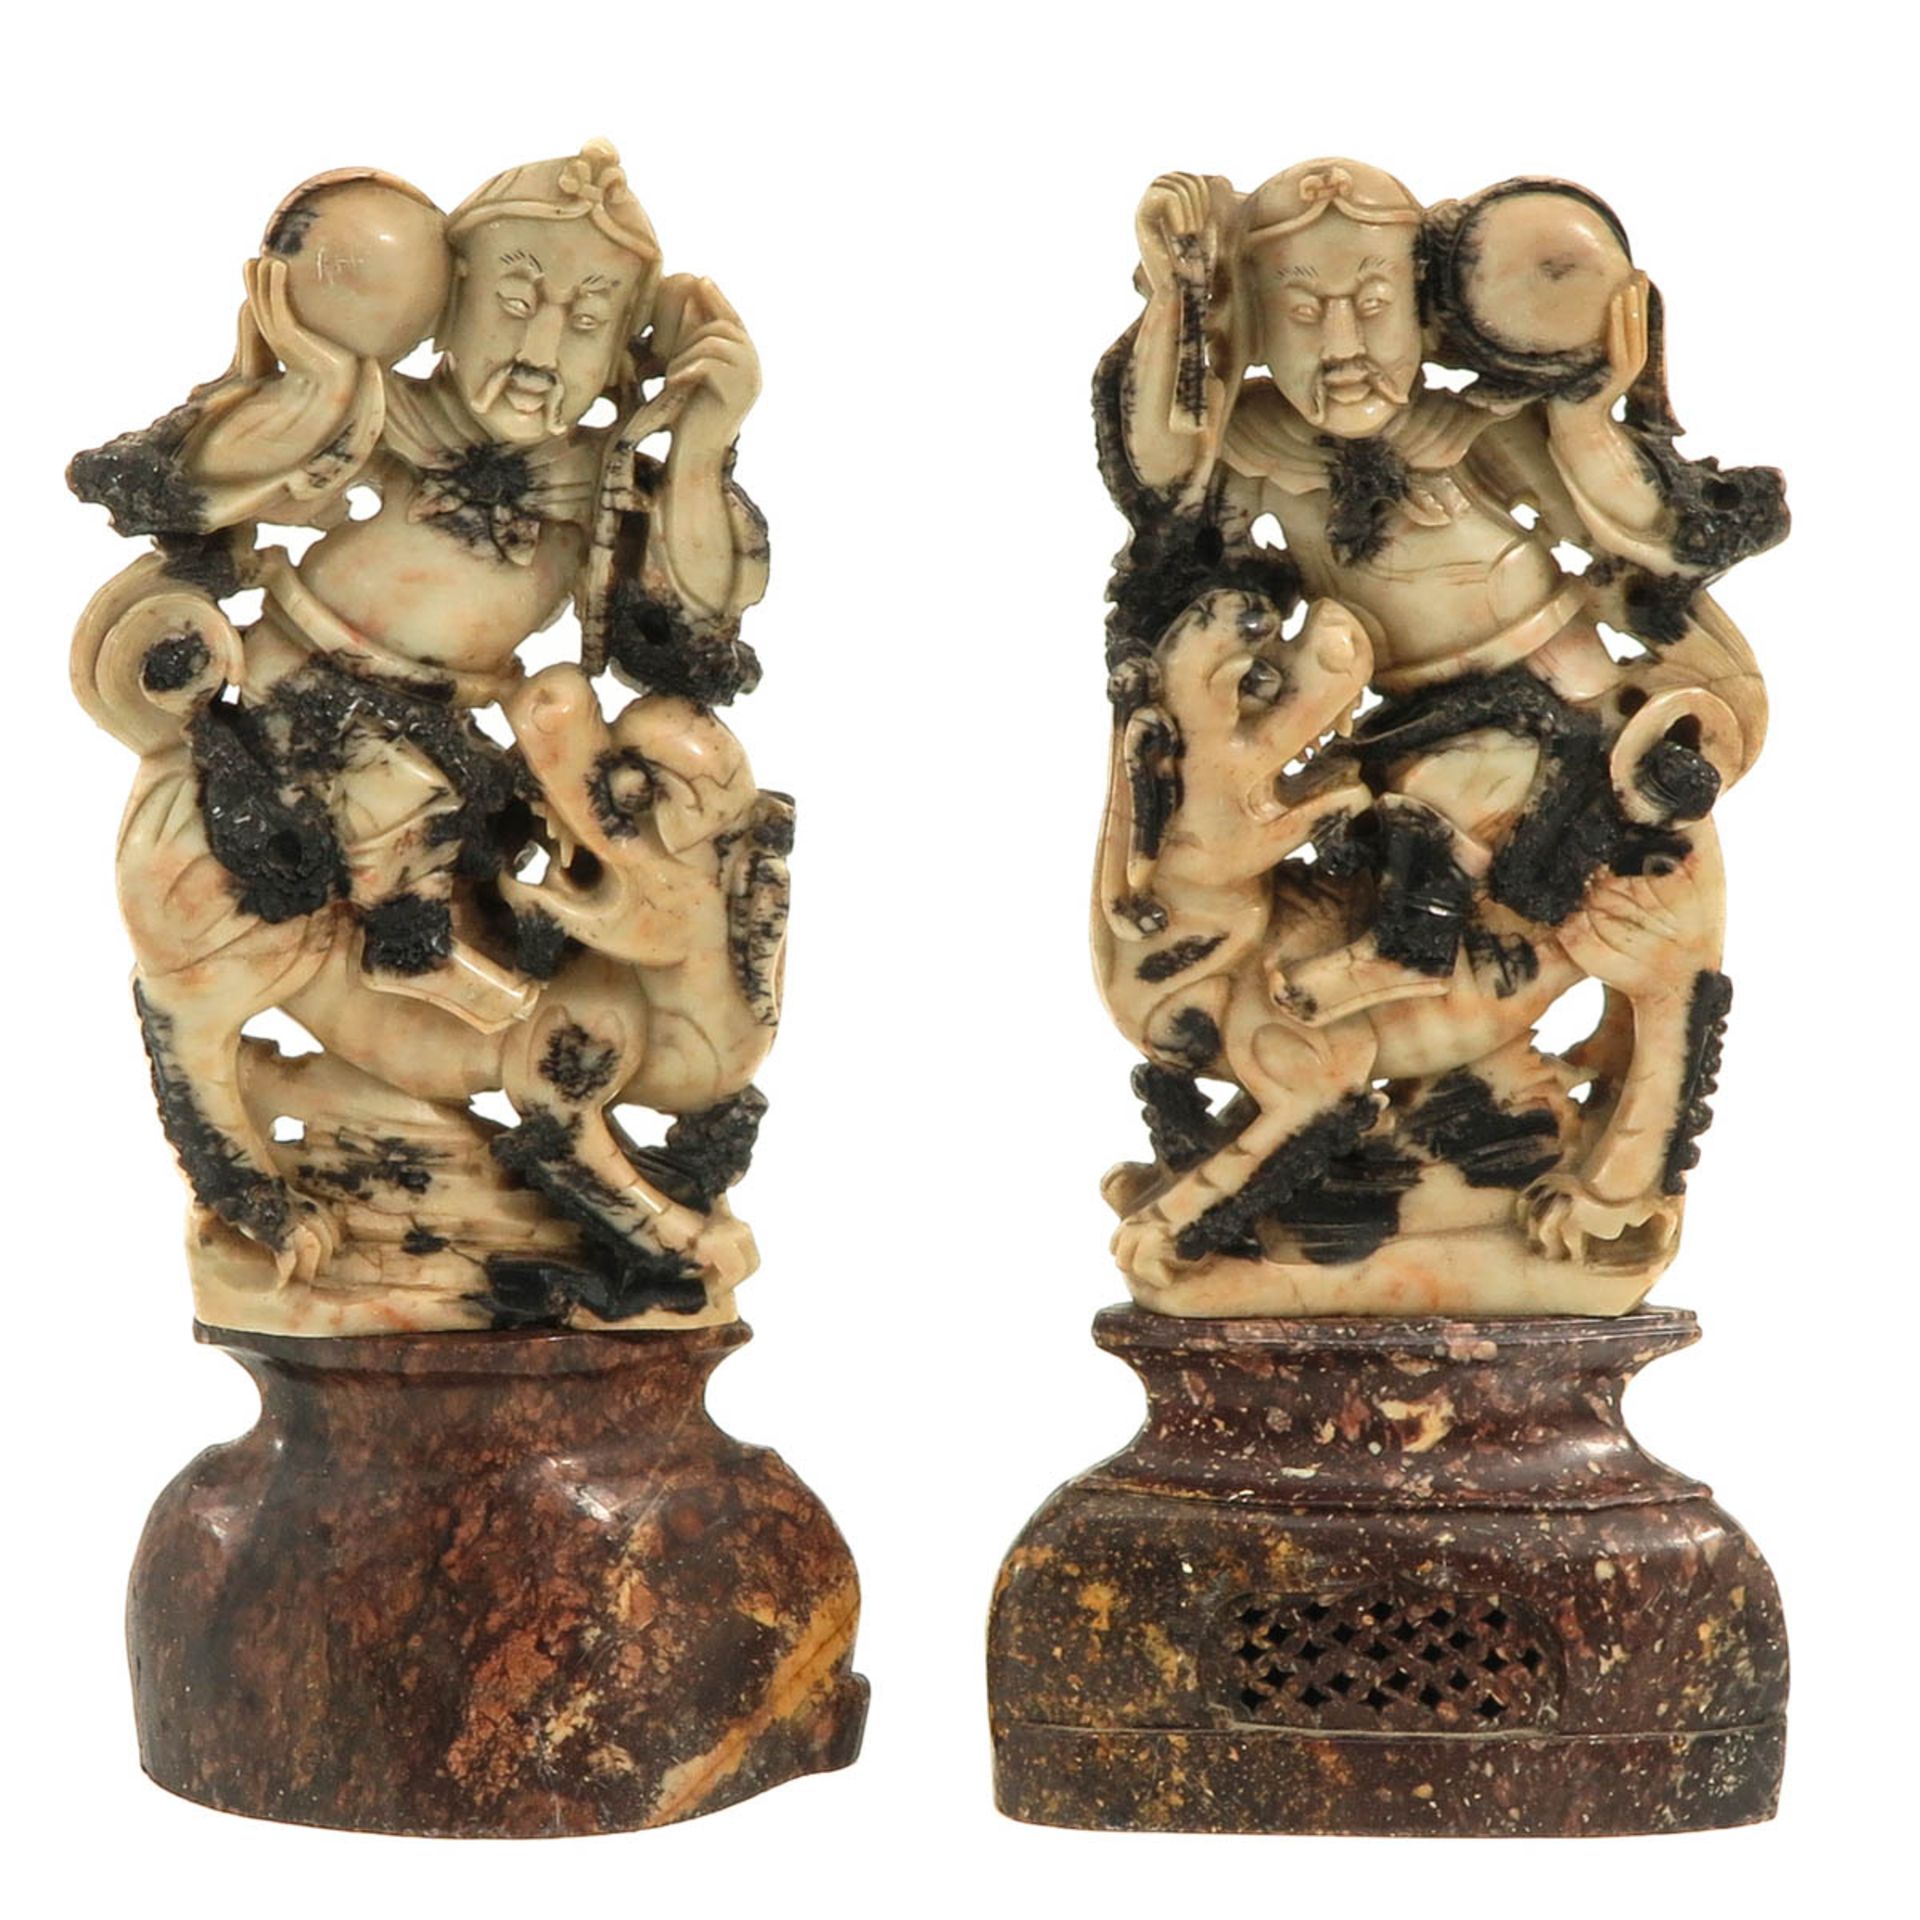 A Pair of Soapstone Sculptures